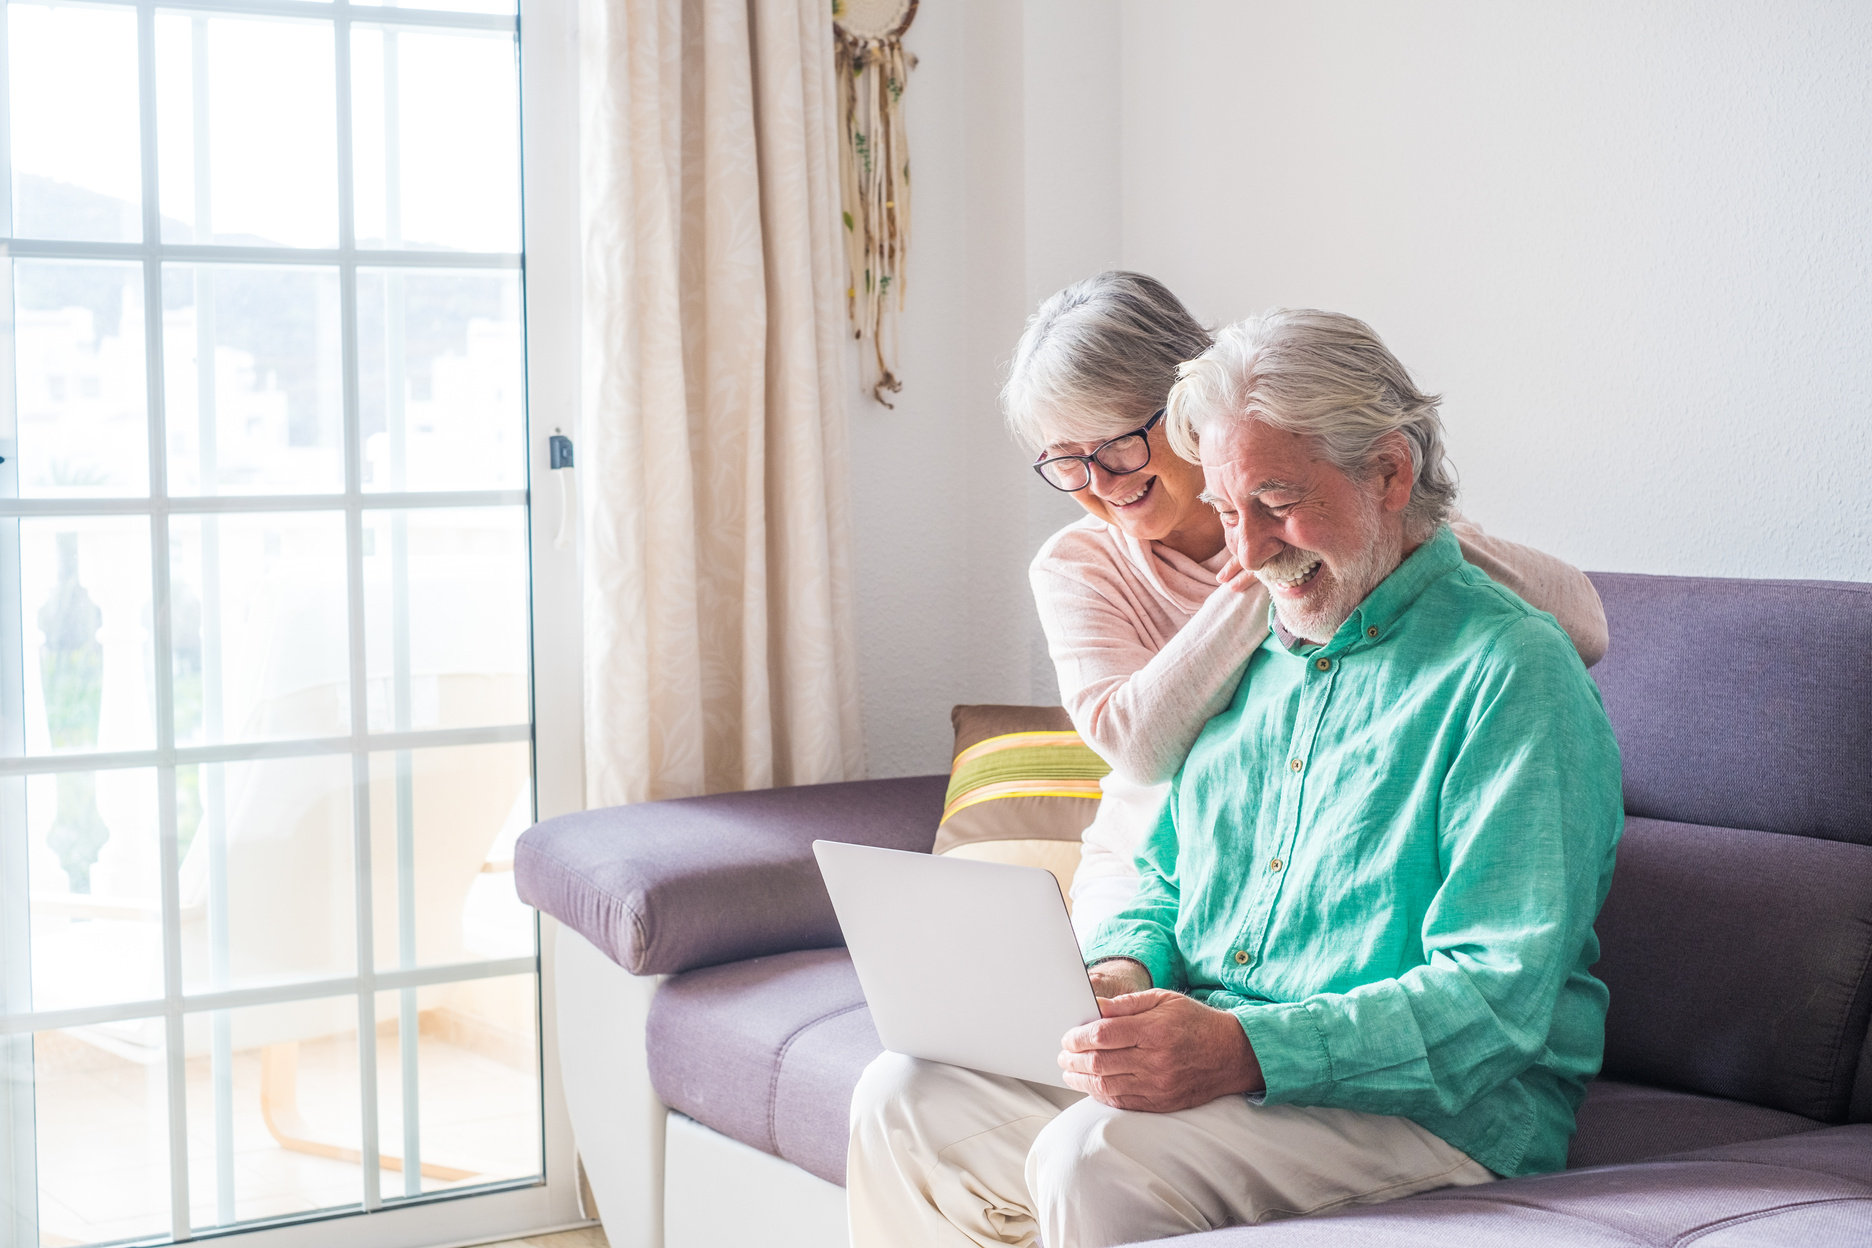 Elderly Couple Using a Laptop in the Living Room